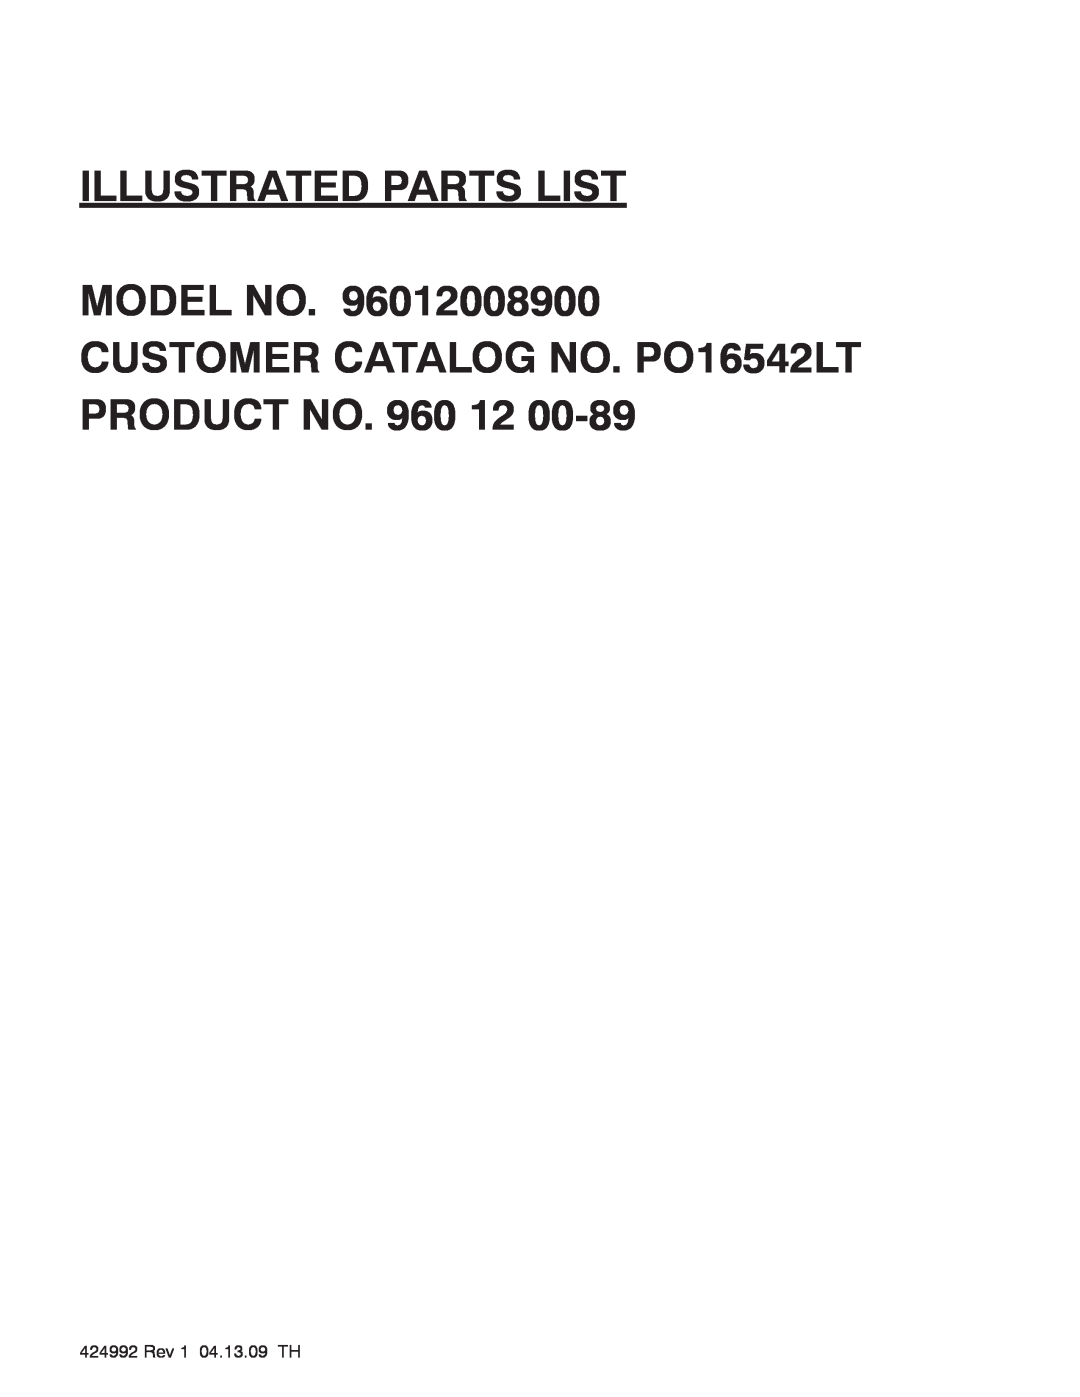 Poulan 96012008900, 960 12 00-89 manual Illustrated Parts List, Rev 1 04.13.09 TH 